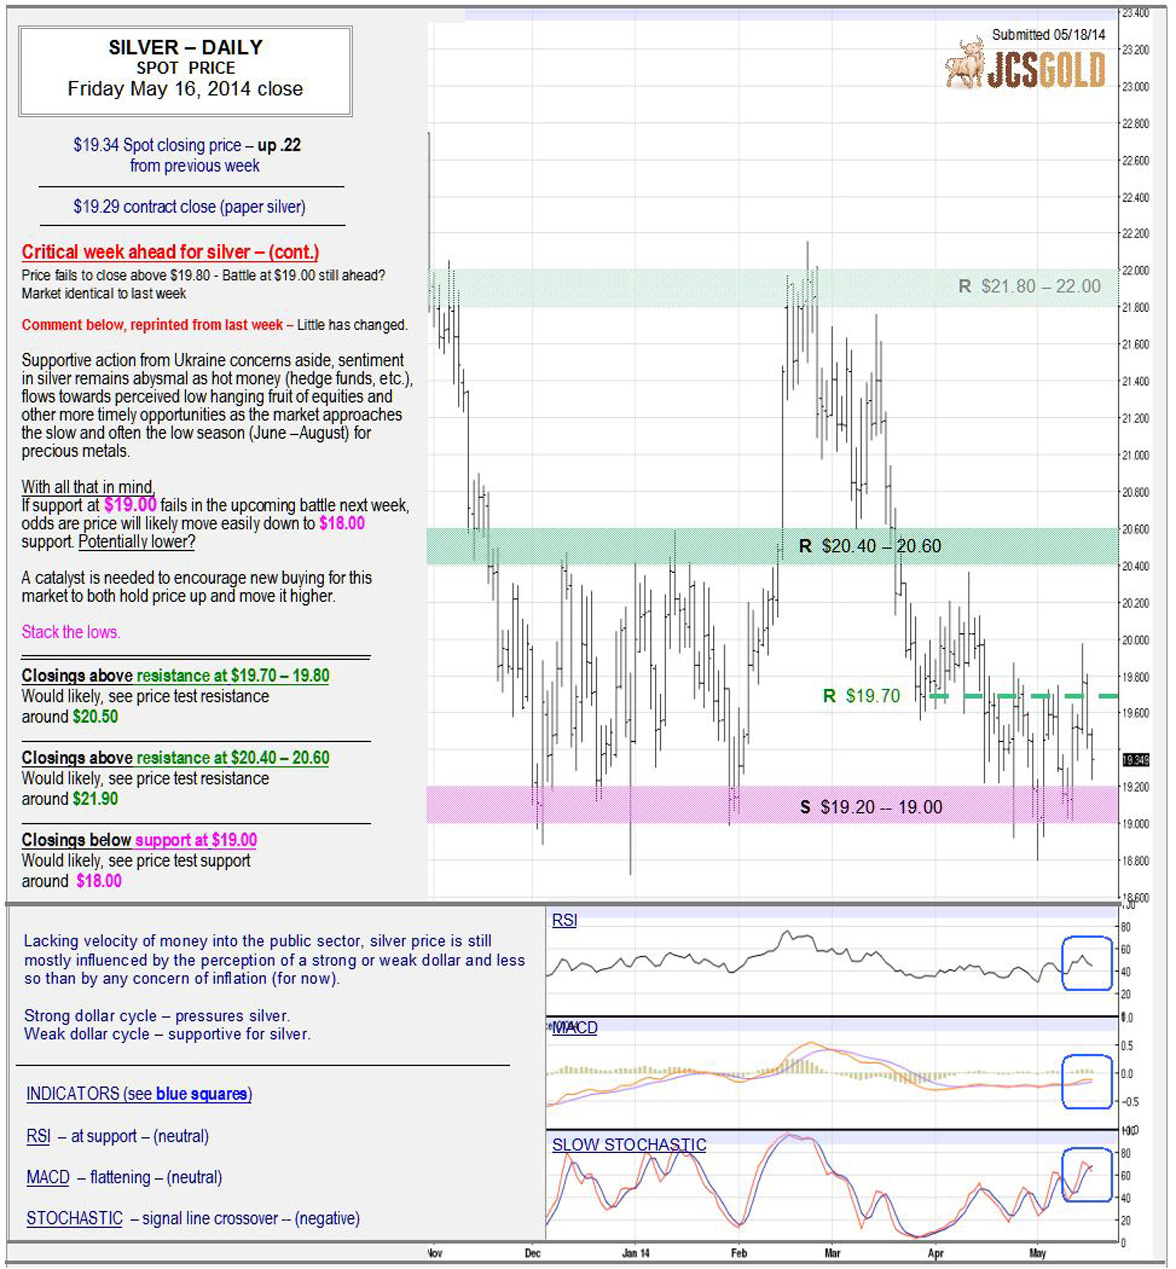 May 16, 2014 chart & commentary